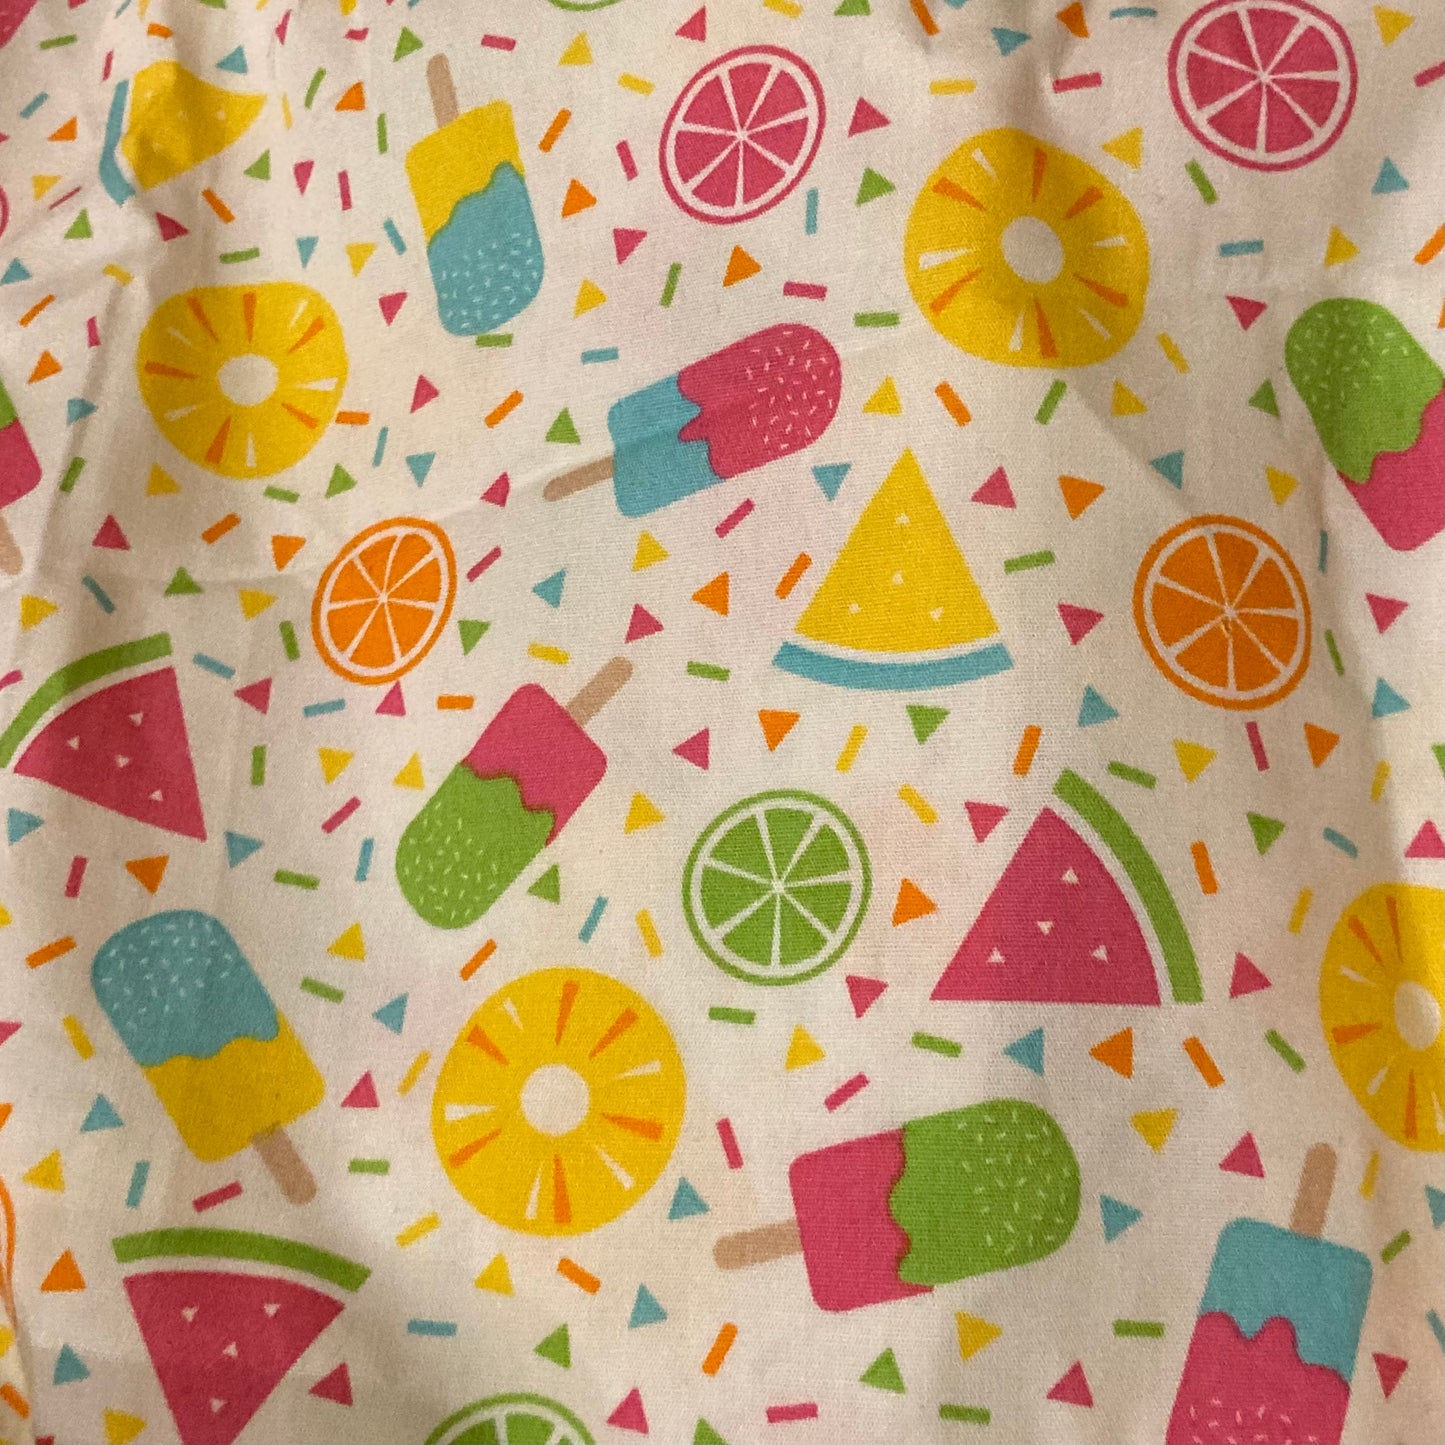 Bright and rainbow fabric ice cream or noodle pot holder